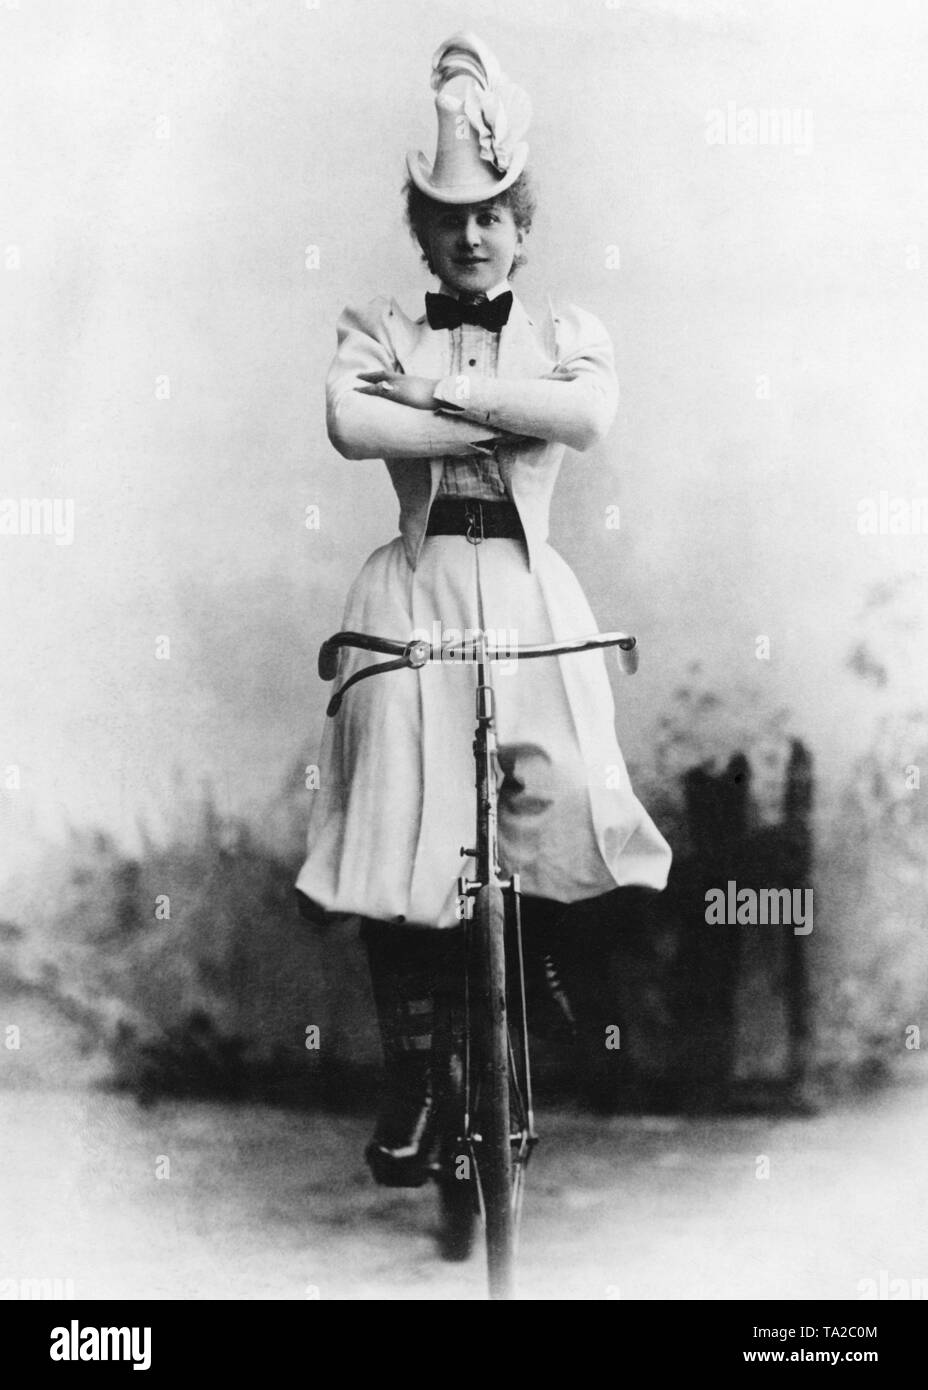 From game to sport - a bicycle artist in her sports costume. Stock Photo